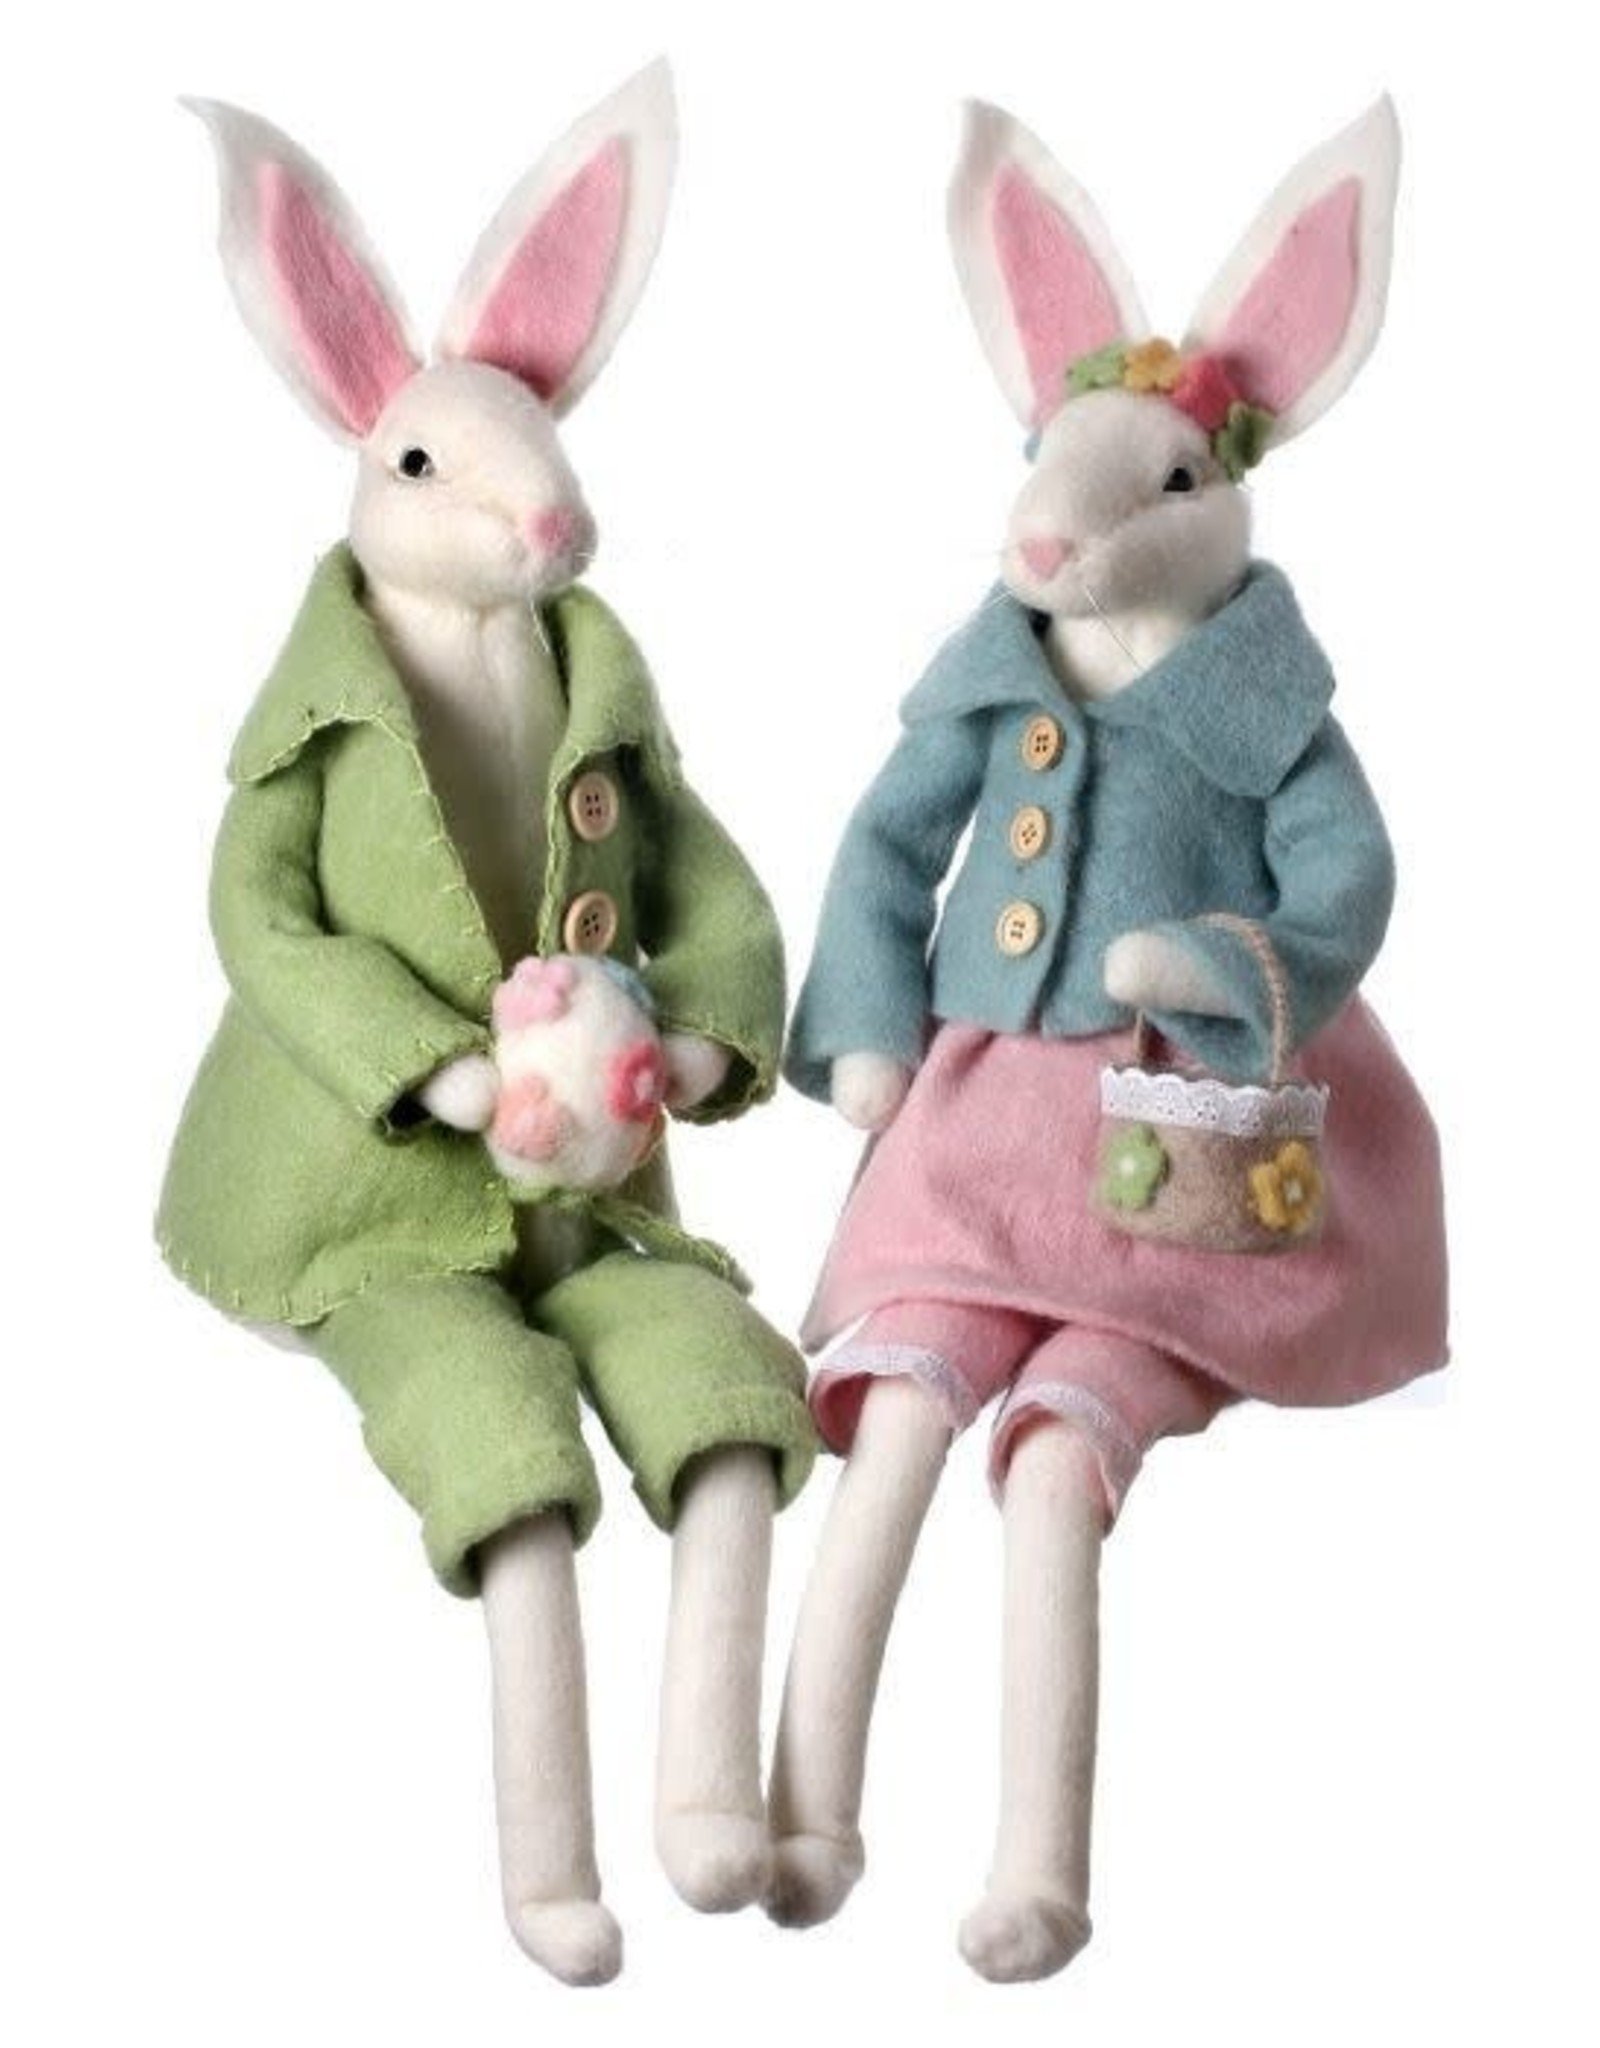 Wool Vintage Sitting Bunny Couple Figures by Valerie